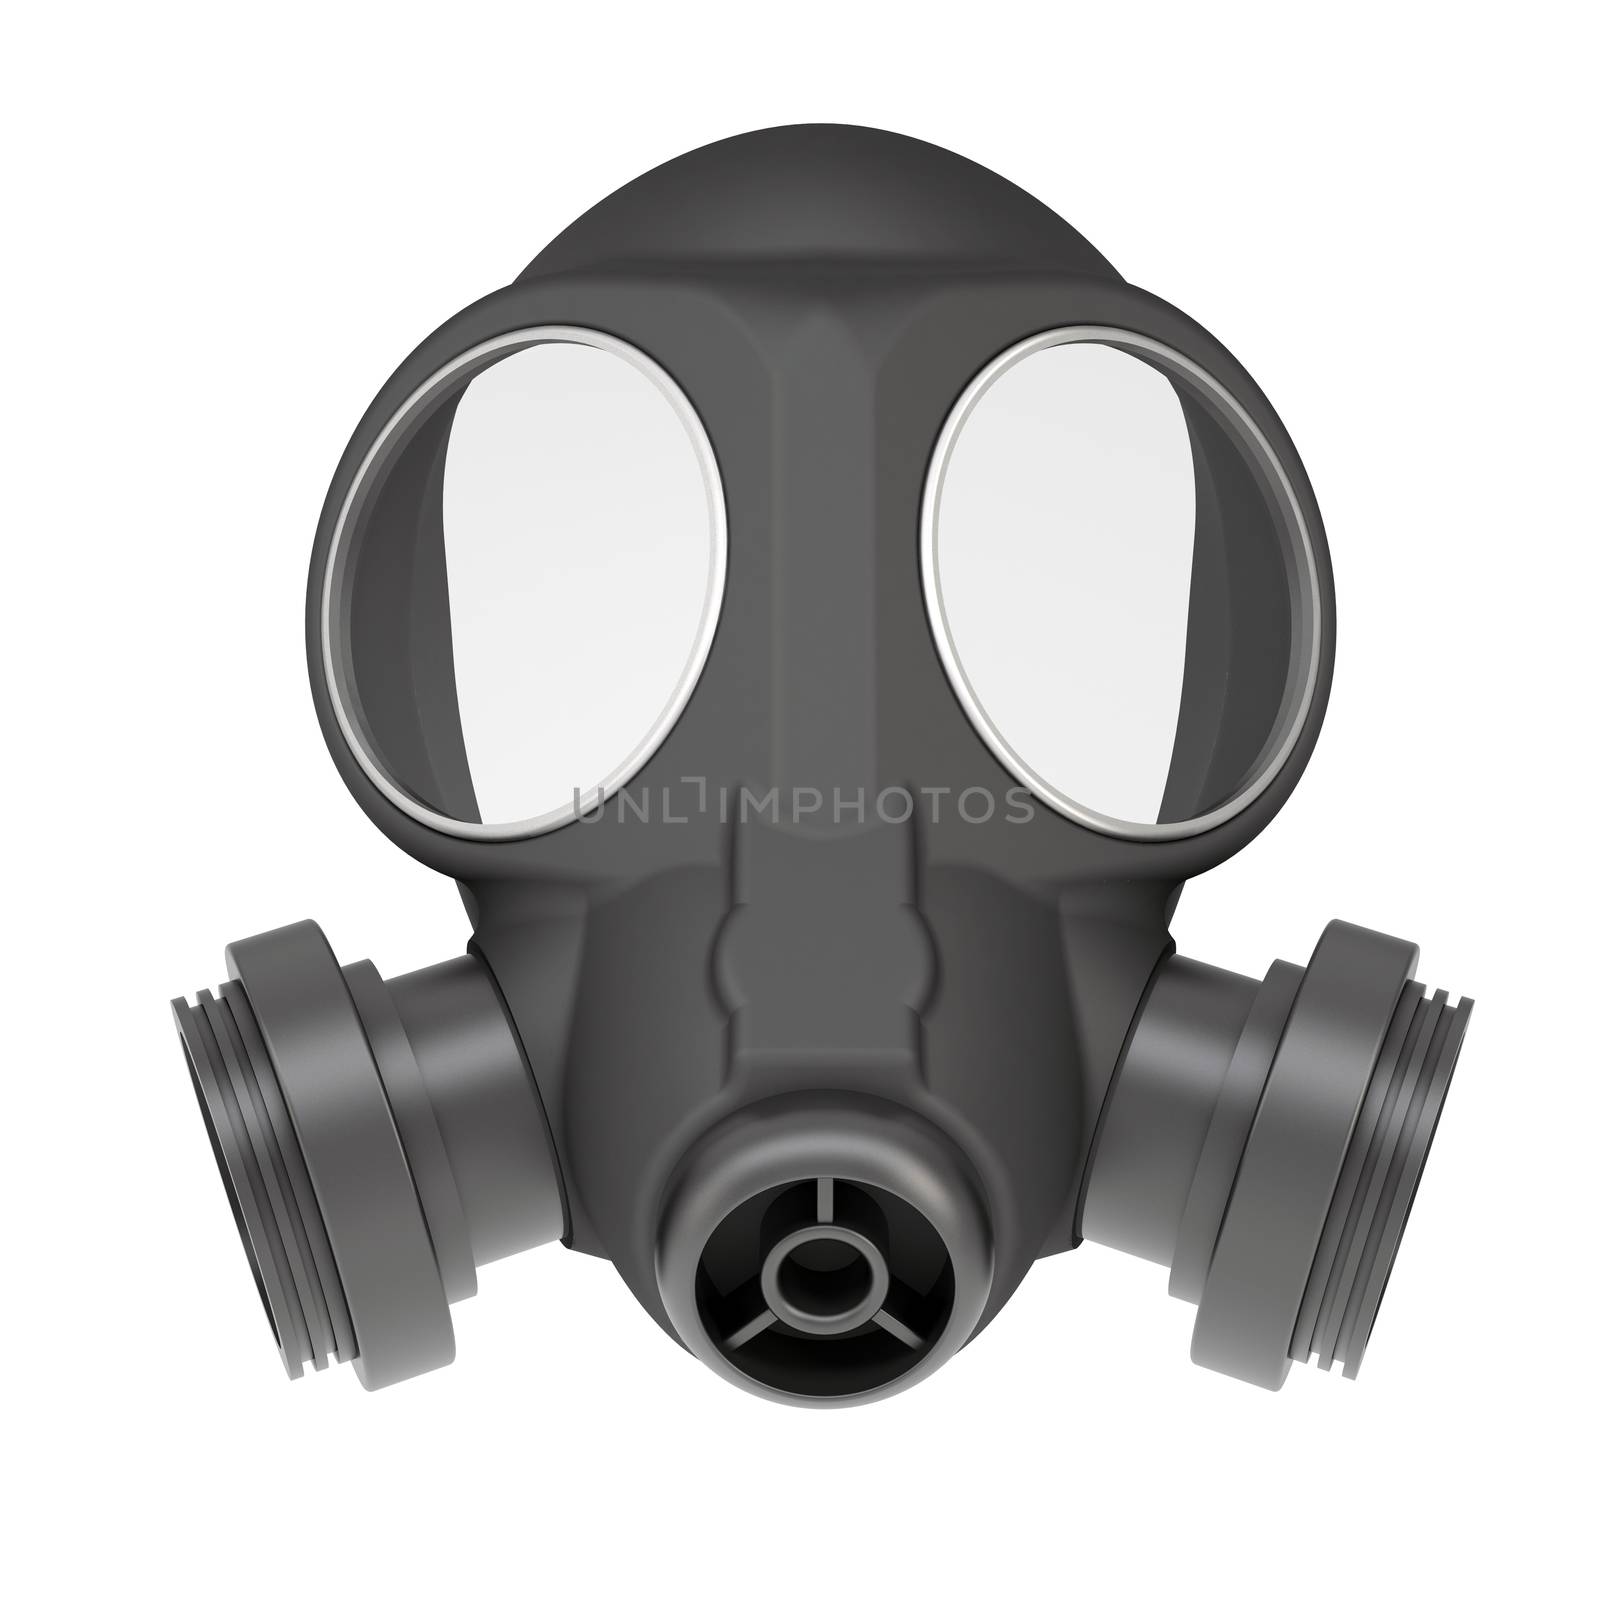 Gas mask. Isolated render on a white background